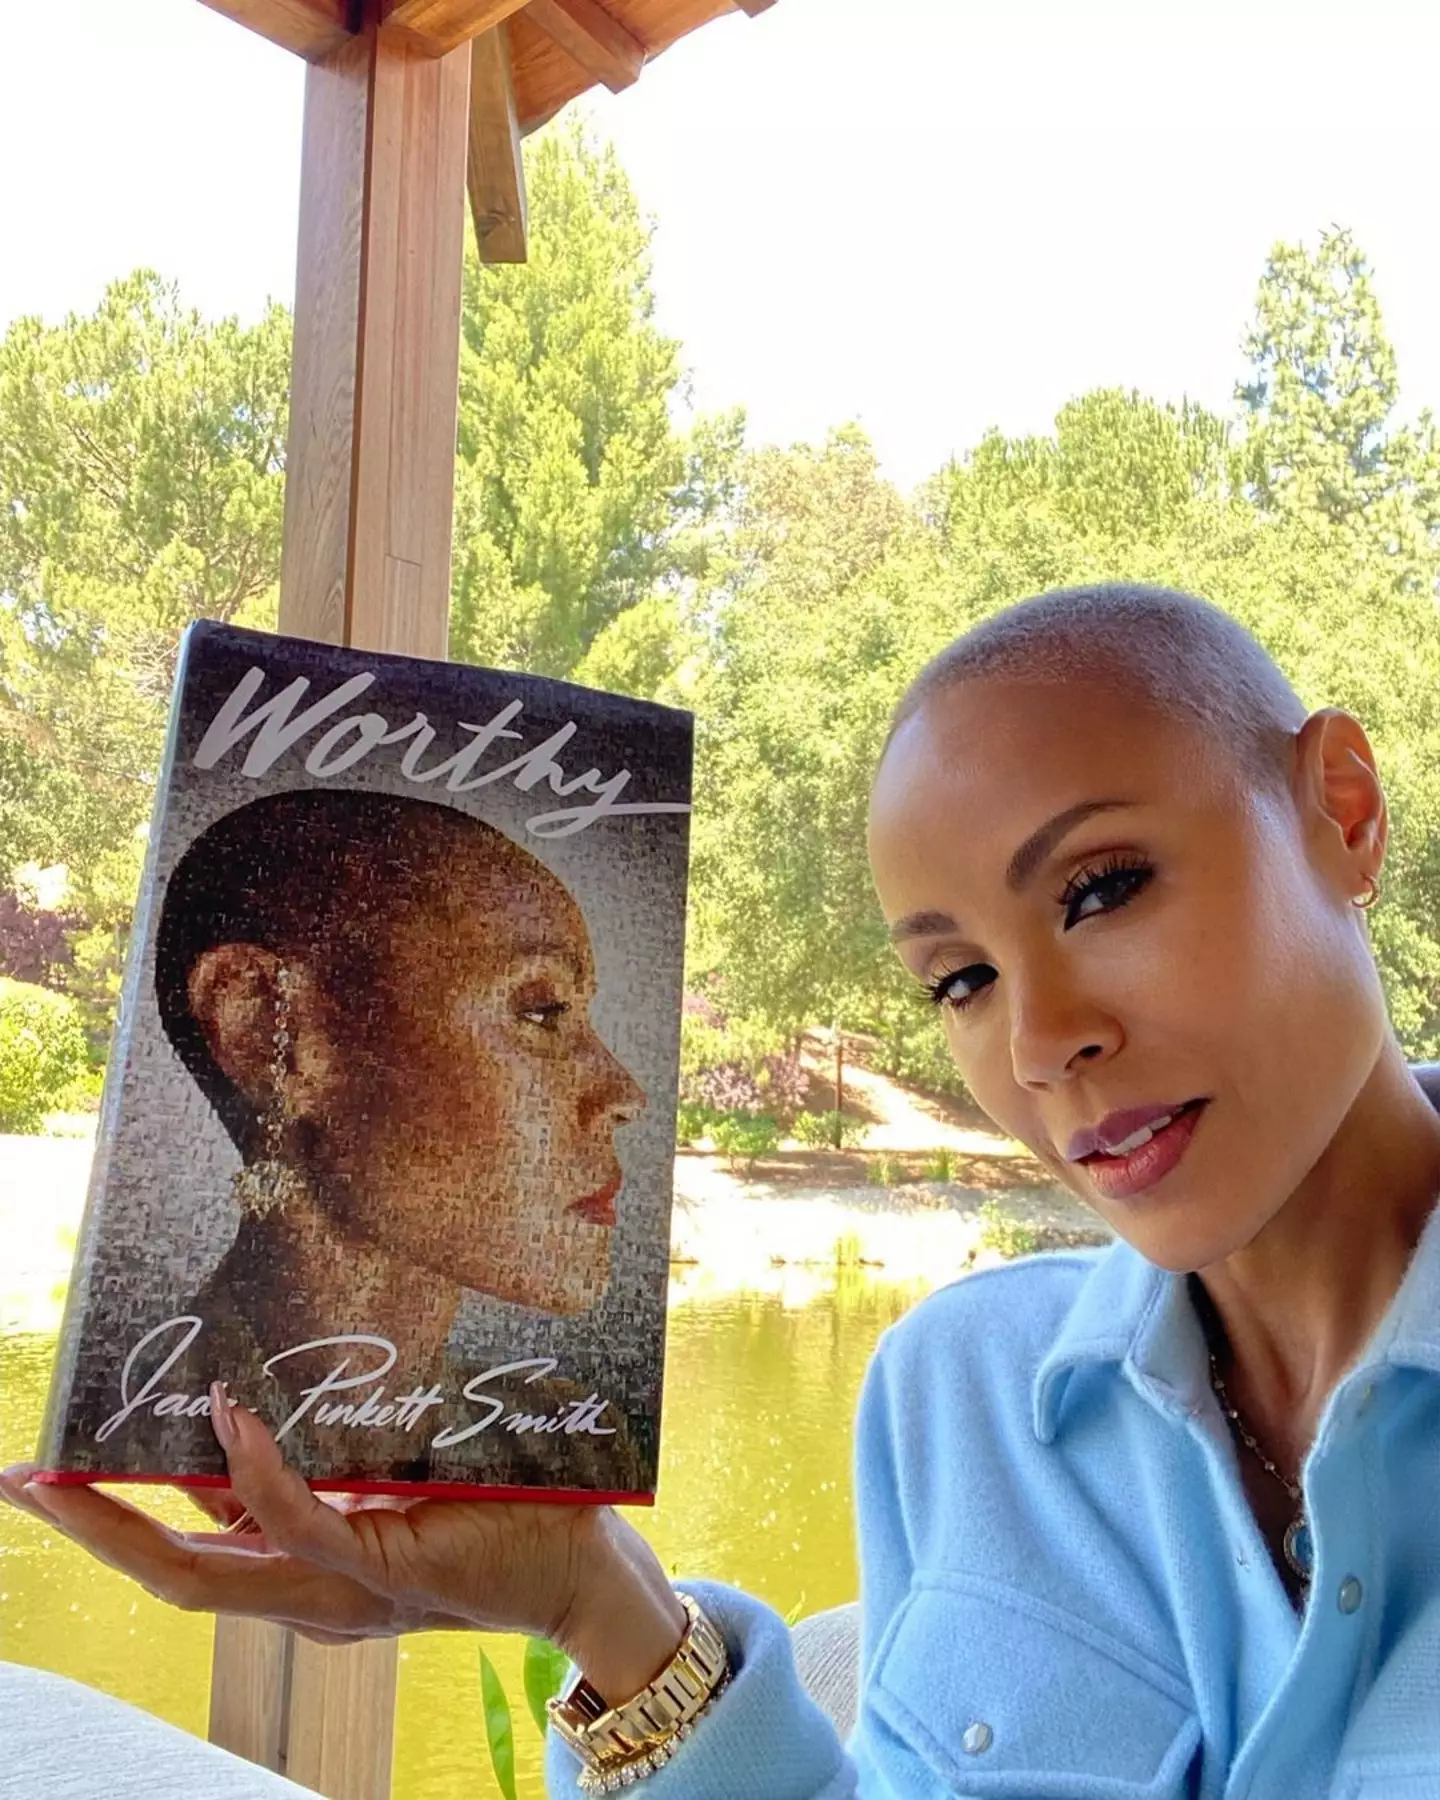 Jada said she addresses the topic in her new book.